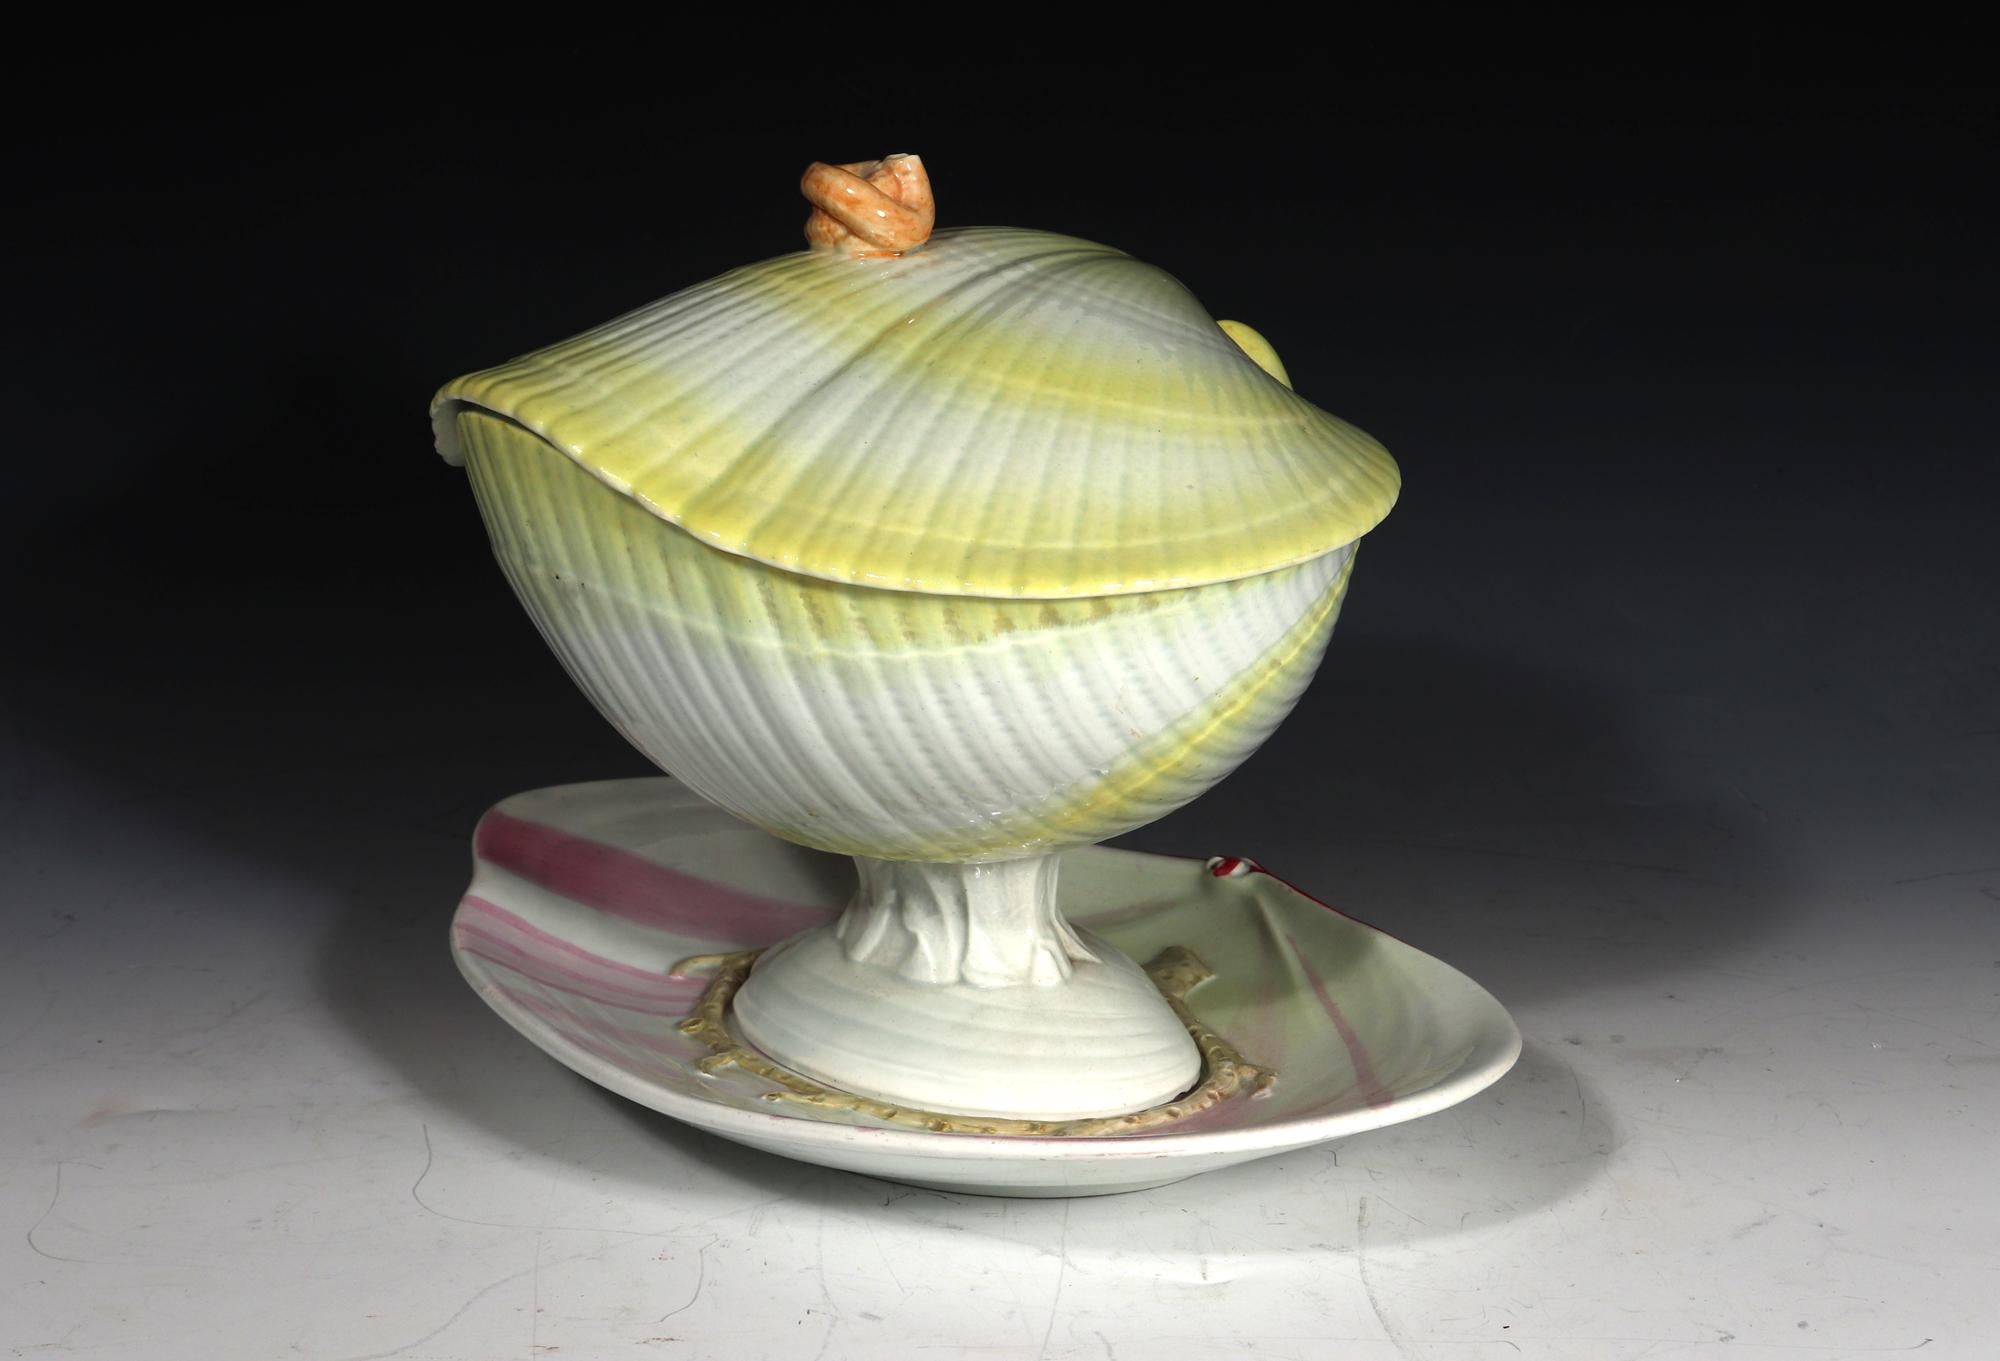 Wedgwood Nautilus sauce Tureen, cover & stand with Rare Yellow Color,
Circa 1790

The Wedgwood pearlware pottery sauce tureen, cover & stand is painted in shades of pink and yellow.  The yellow is a very rare colour to find.  The tureen is made